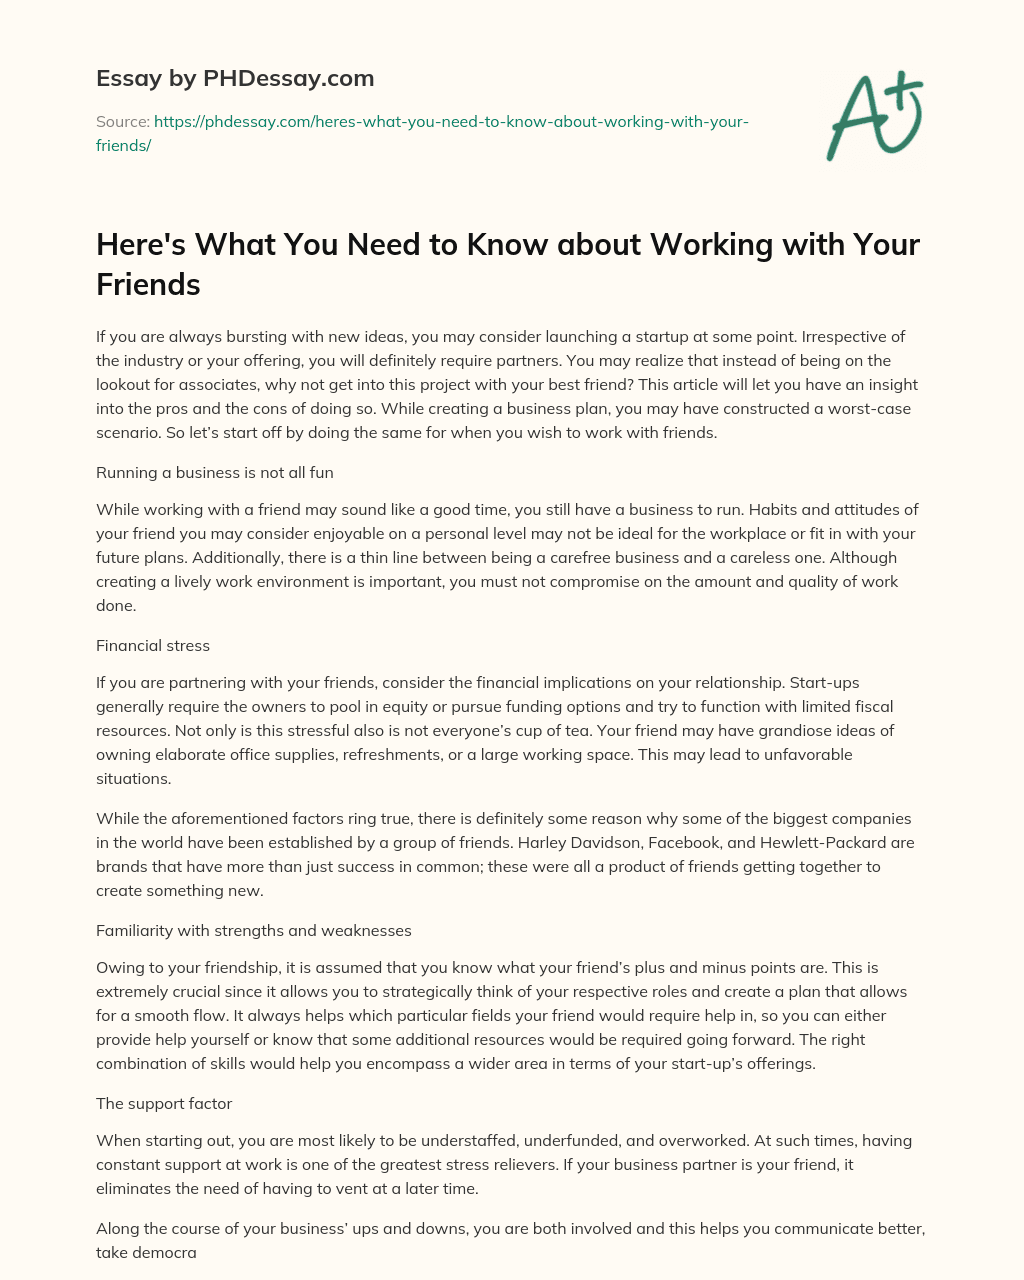 Here’s What You Need to Know about Working with Your Friends essay